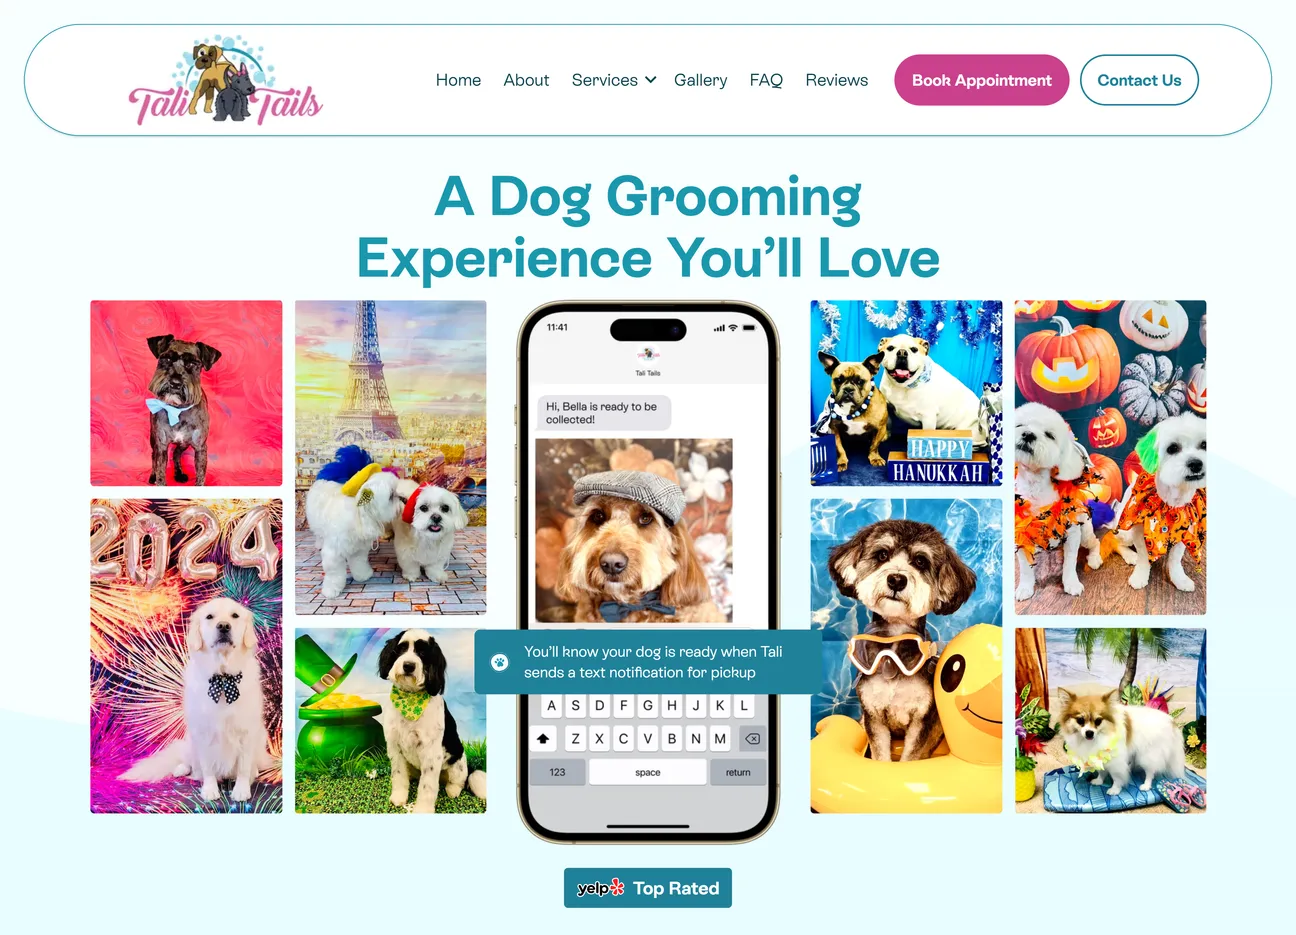 Tali Tails themed dog grooming photos